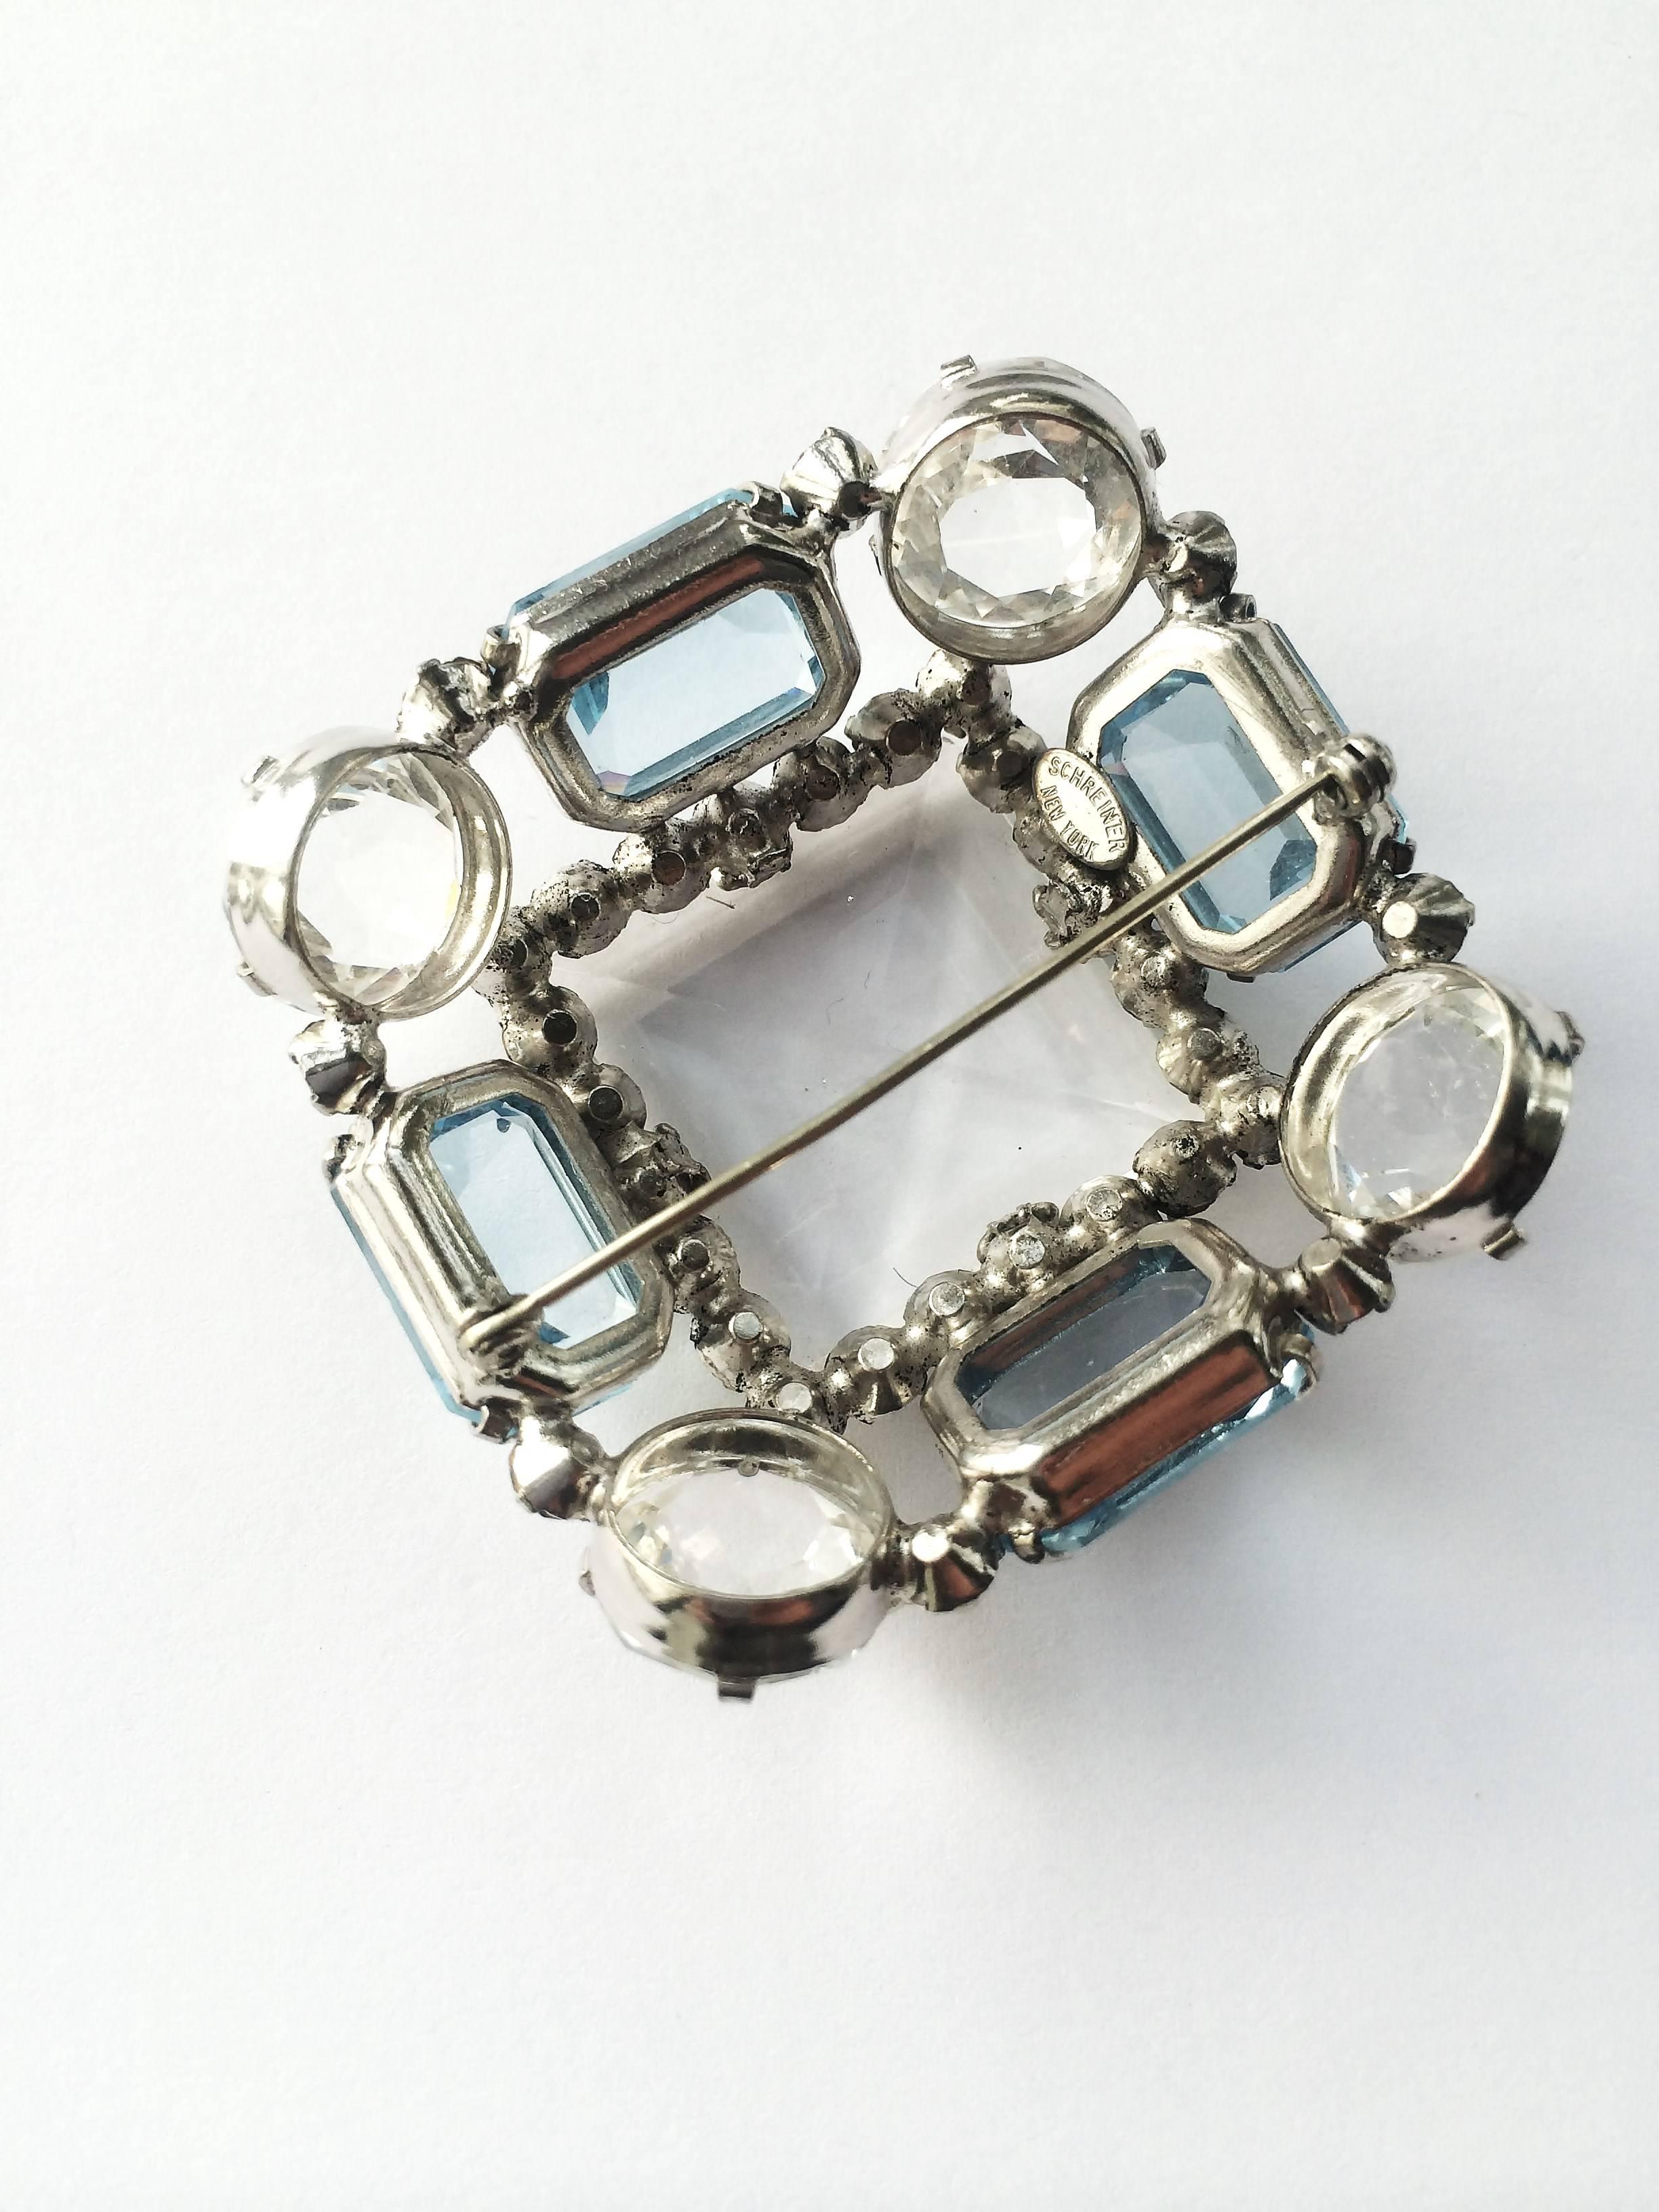 There is something madly princessy about this fantastic 1950s brooch.

Using Schreiner's signature upside down stone technique, this piece glitters and shimmers away reflecting the colours of everything around it. The central glass 'stone' is 1